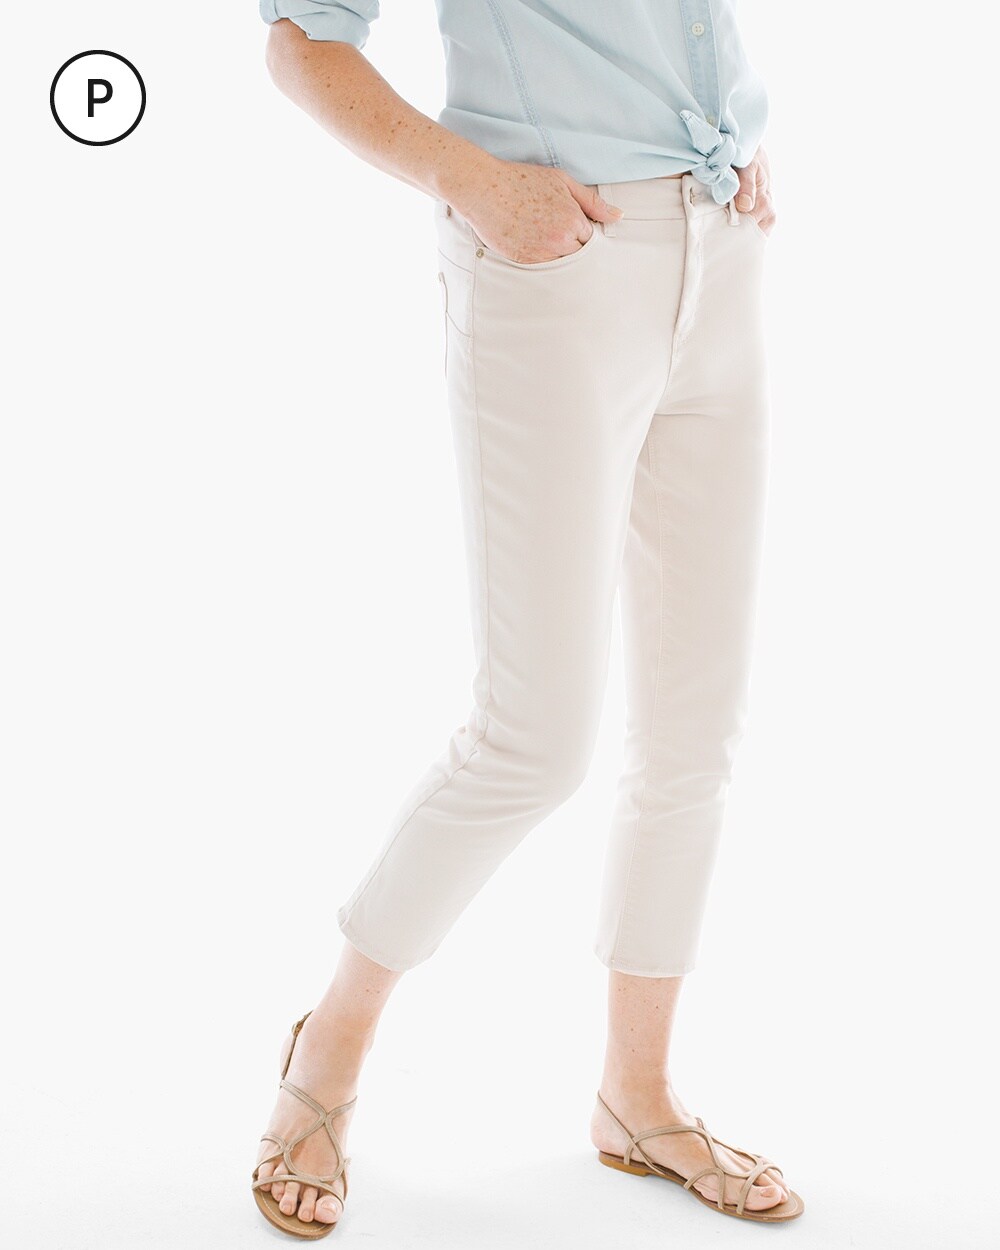 So Lifting Petite Crop Jeans